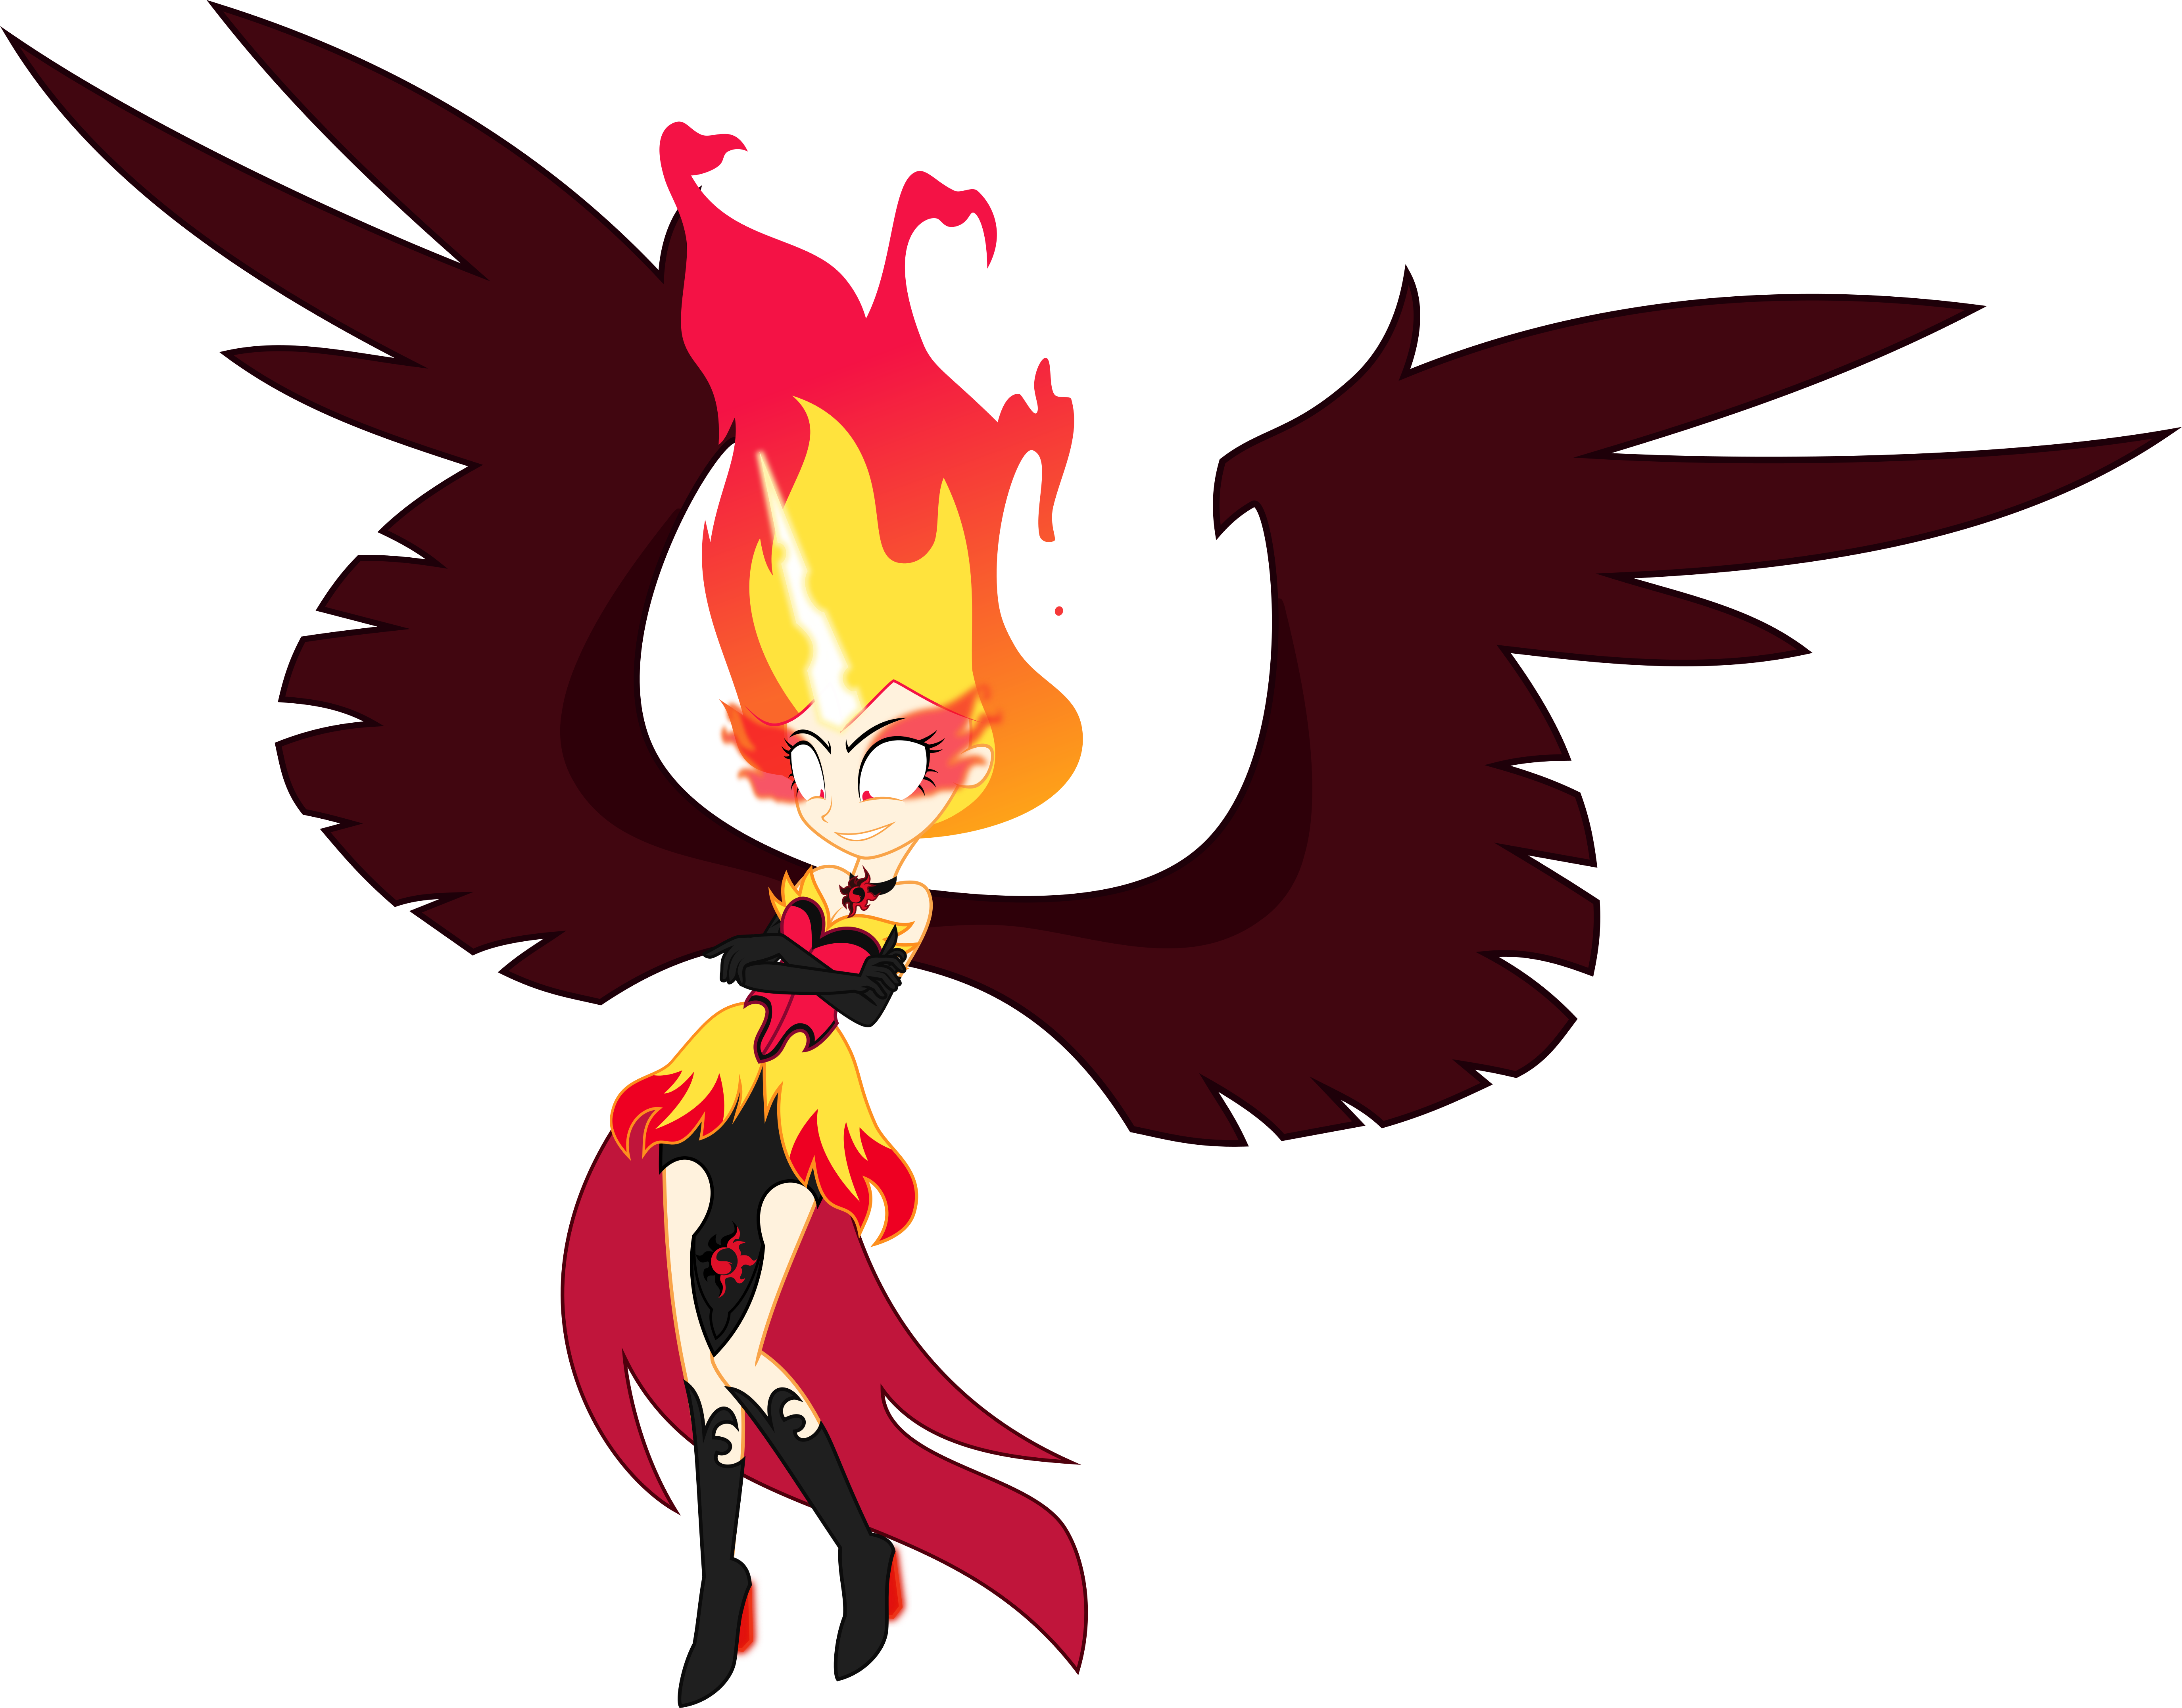 Full Body Vector Of Solar Eclipse From This Image - Sunset Shimmer Equestria Girl (1280x1002)